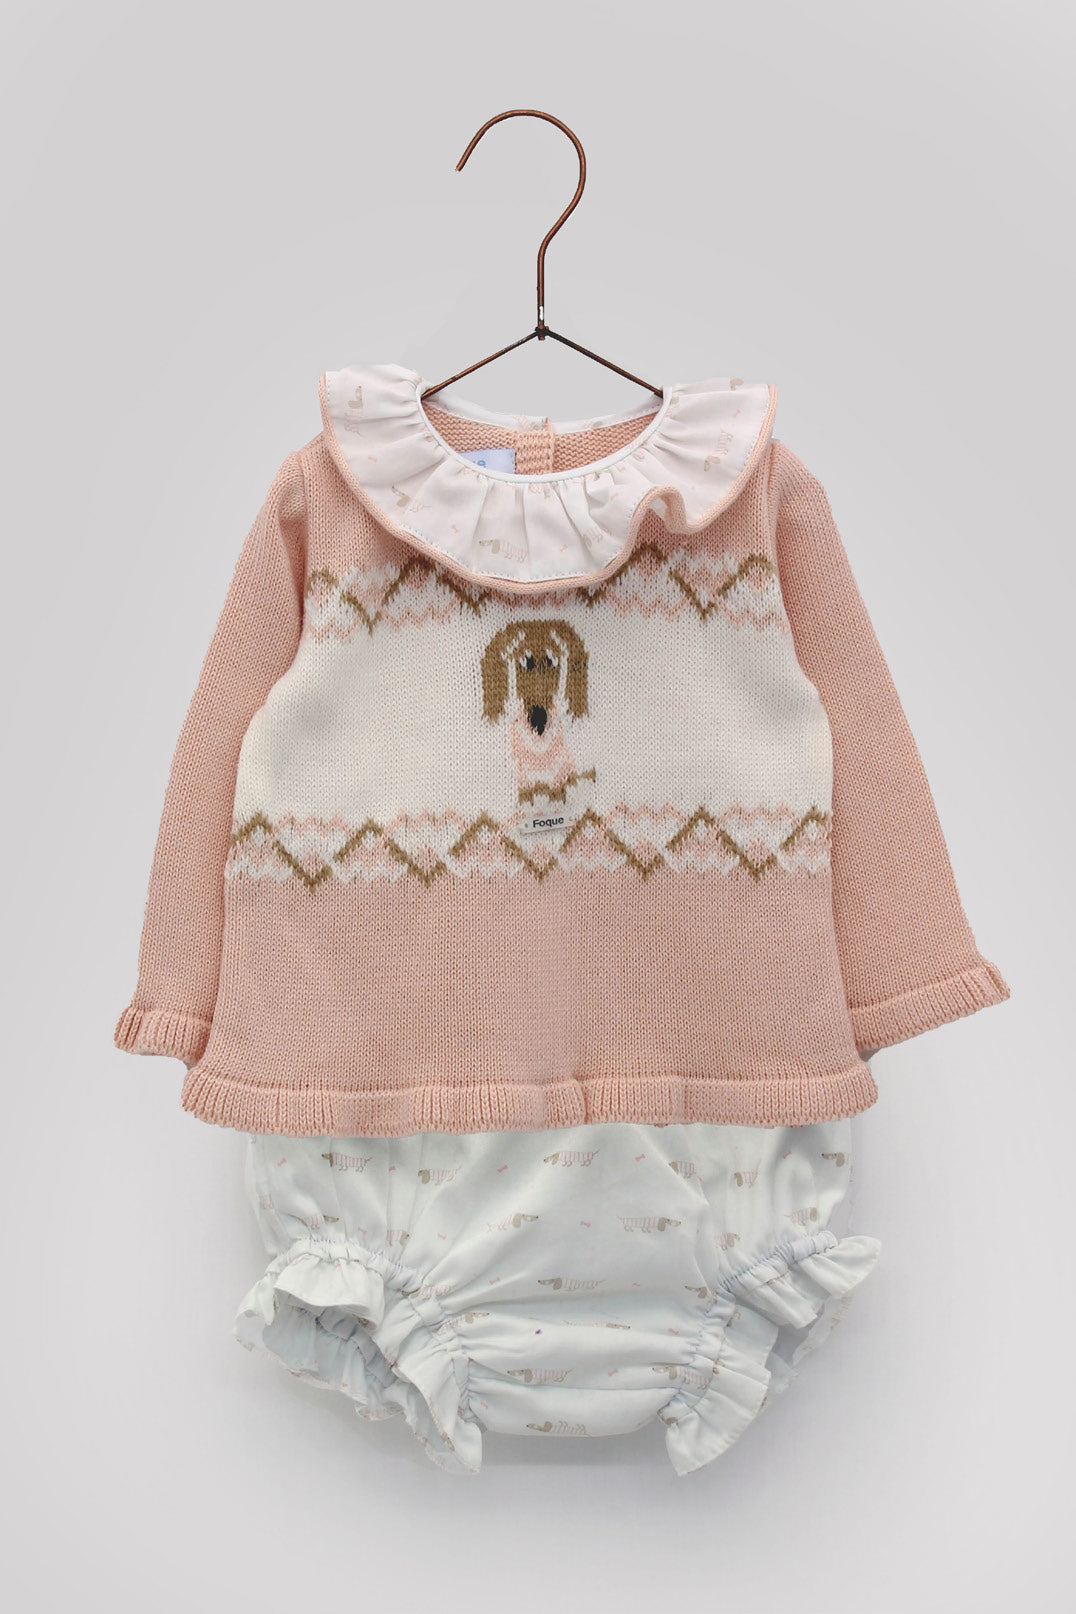 Foque PREORDER "Astrid" Peach Knit Sausage Dog Top & Bloomers | Millie and John